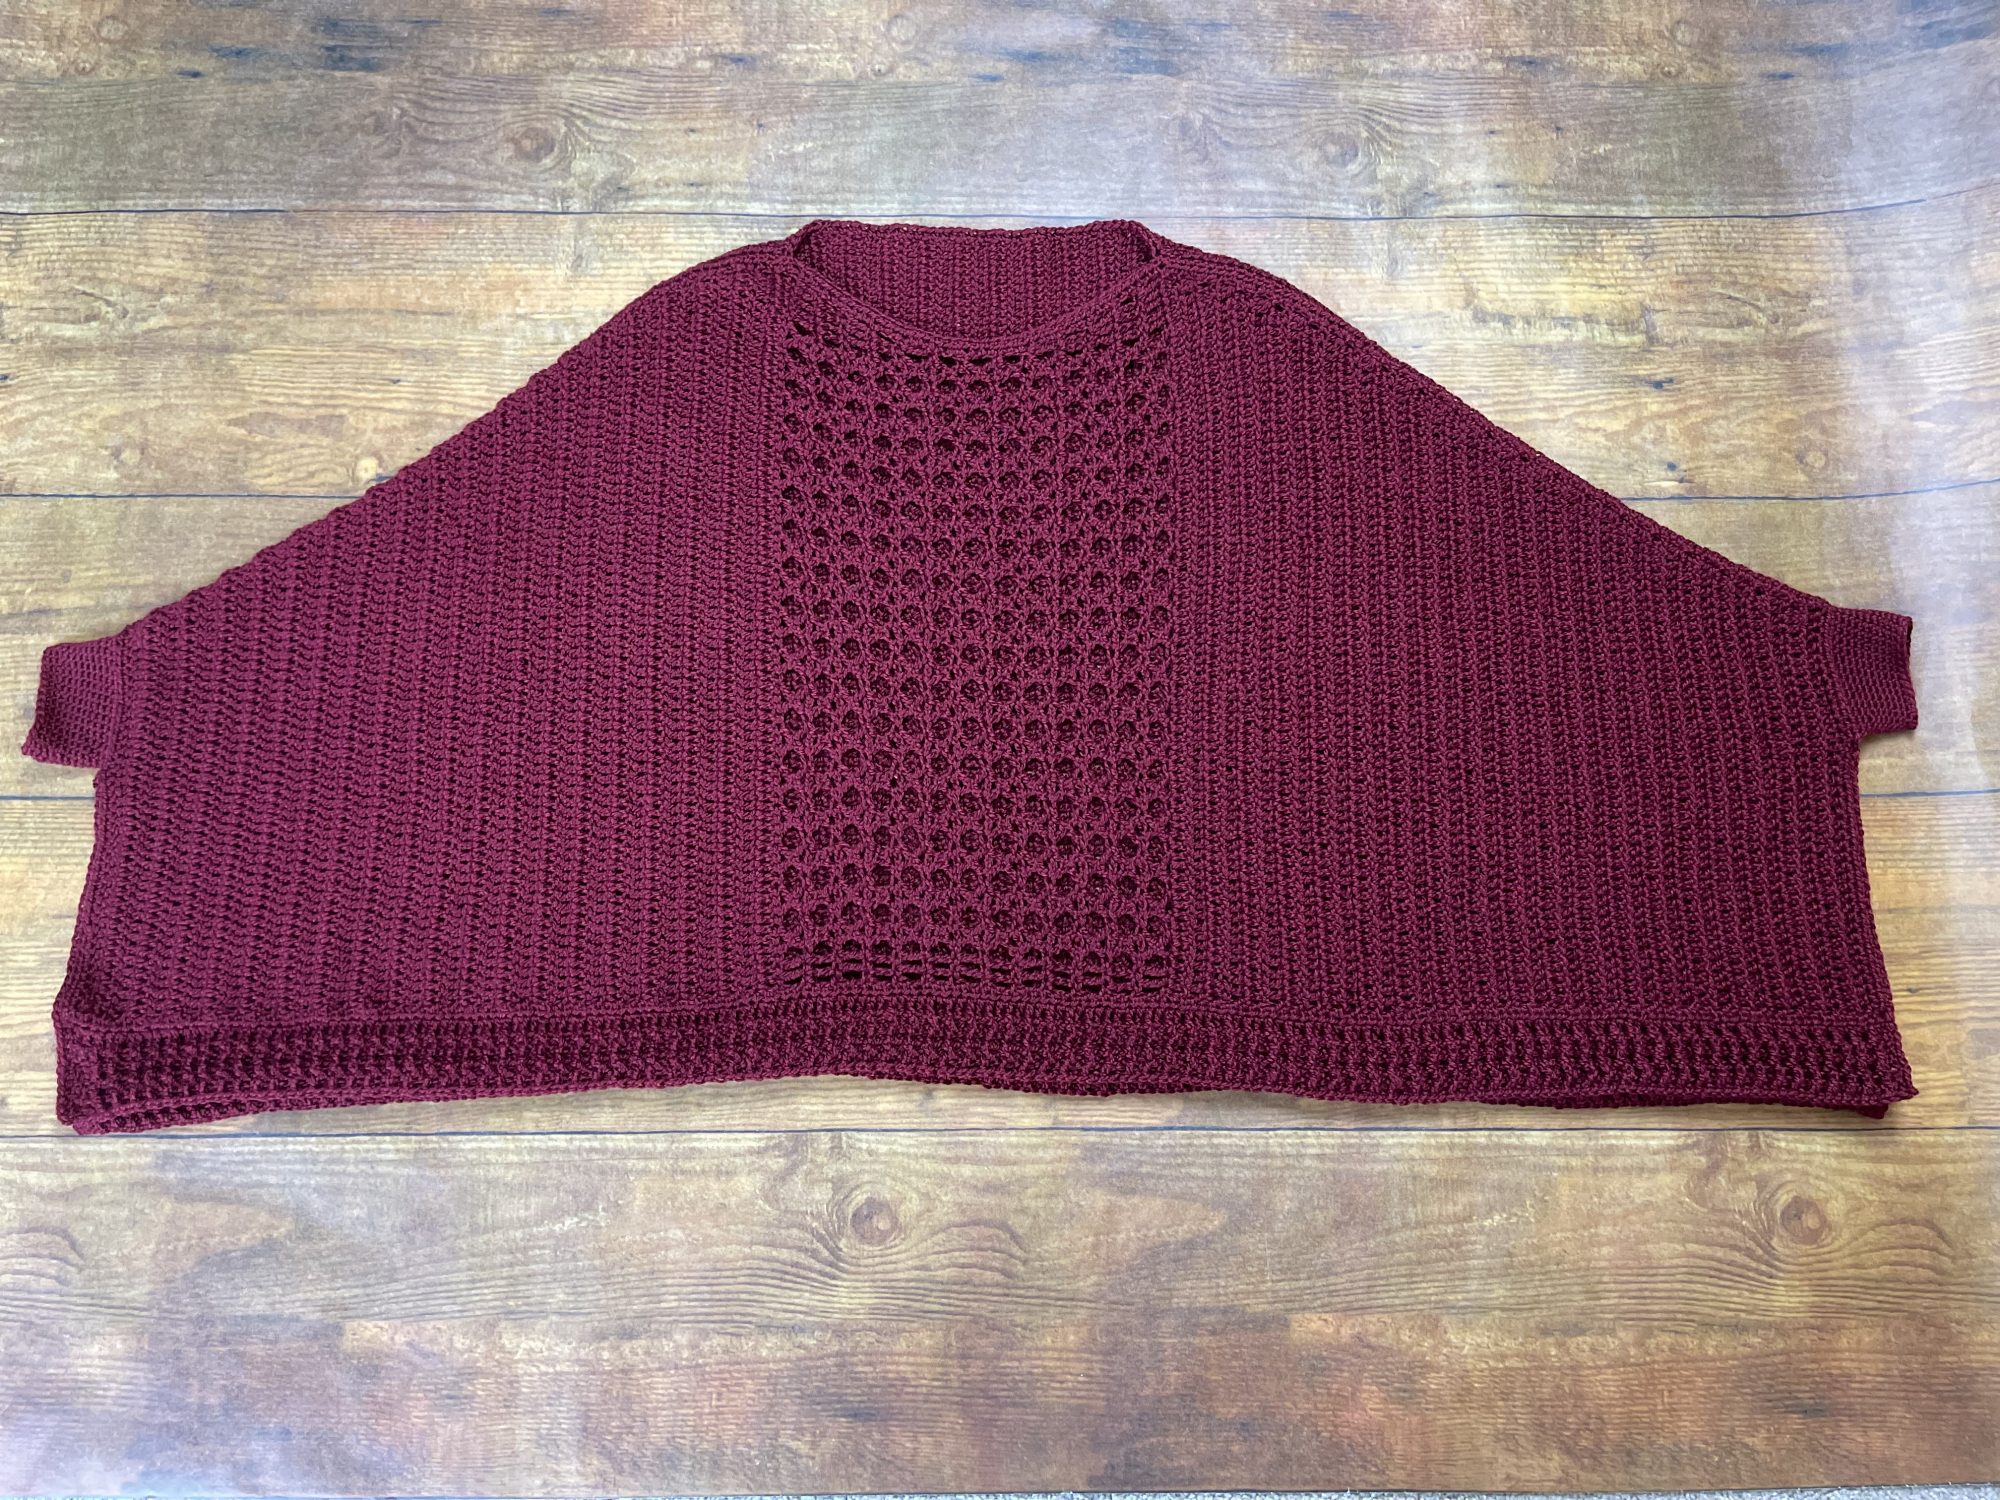 Image shows a burgundy trapezoid shaped crochet garment with small wrist cuffs on each side. The center is created with an open stitch, and it has a ribbed hem.